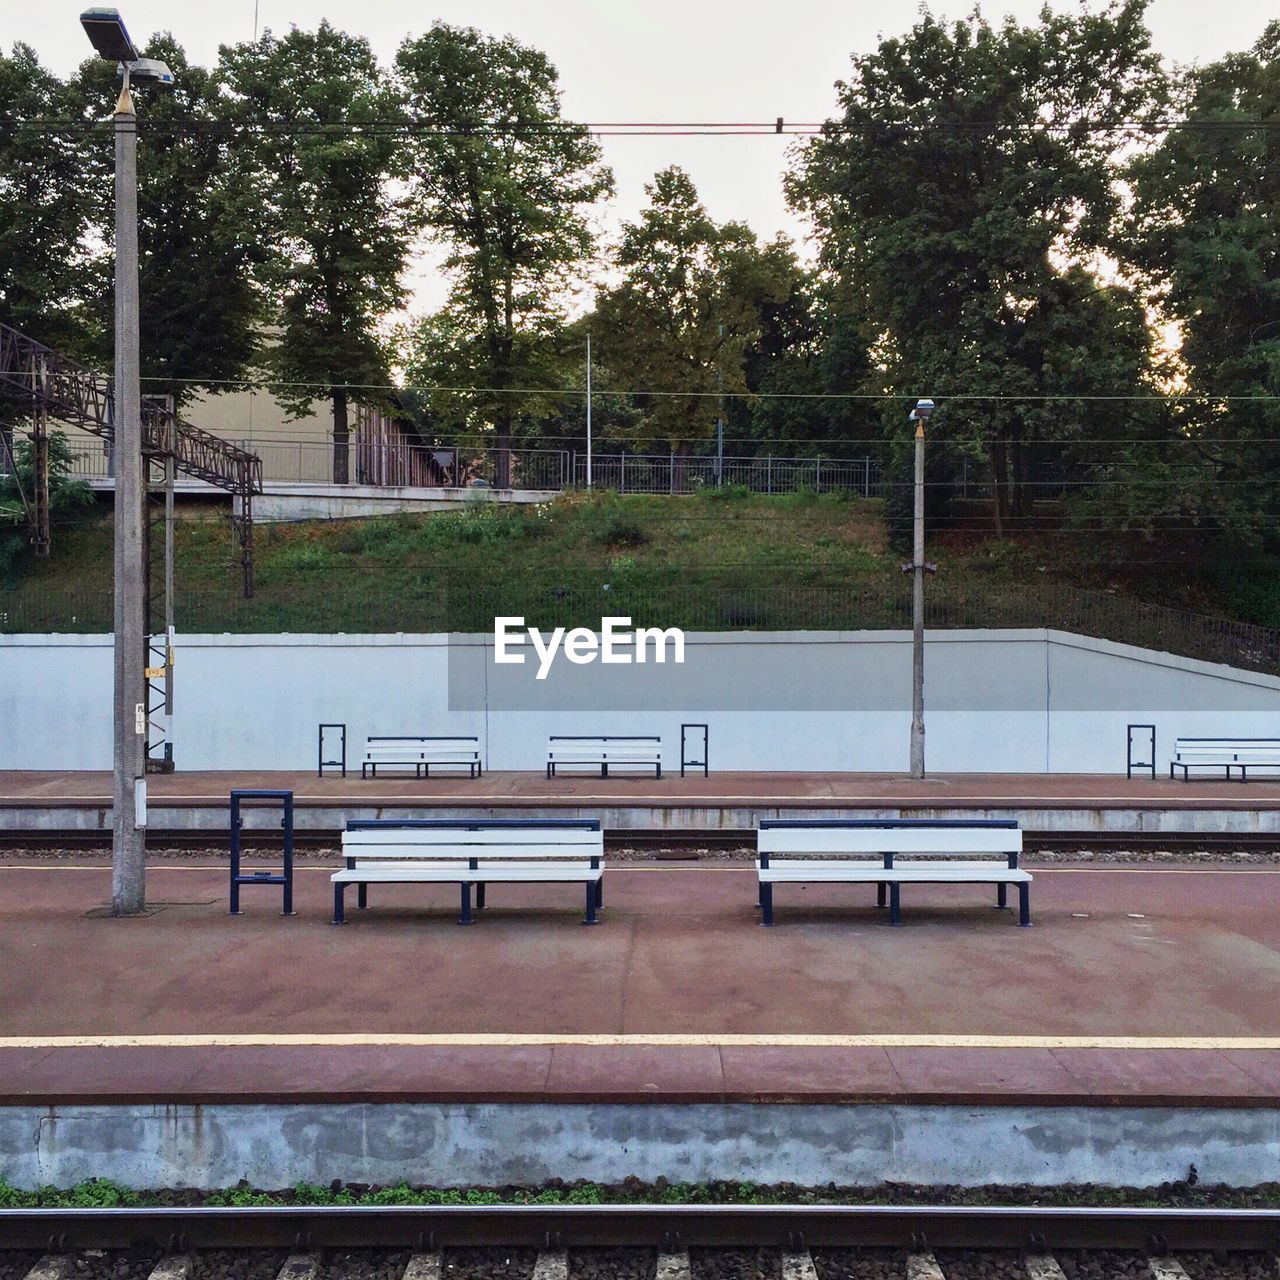 Empty benches at railroad station platform by trees against sky